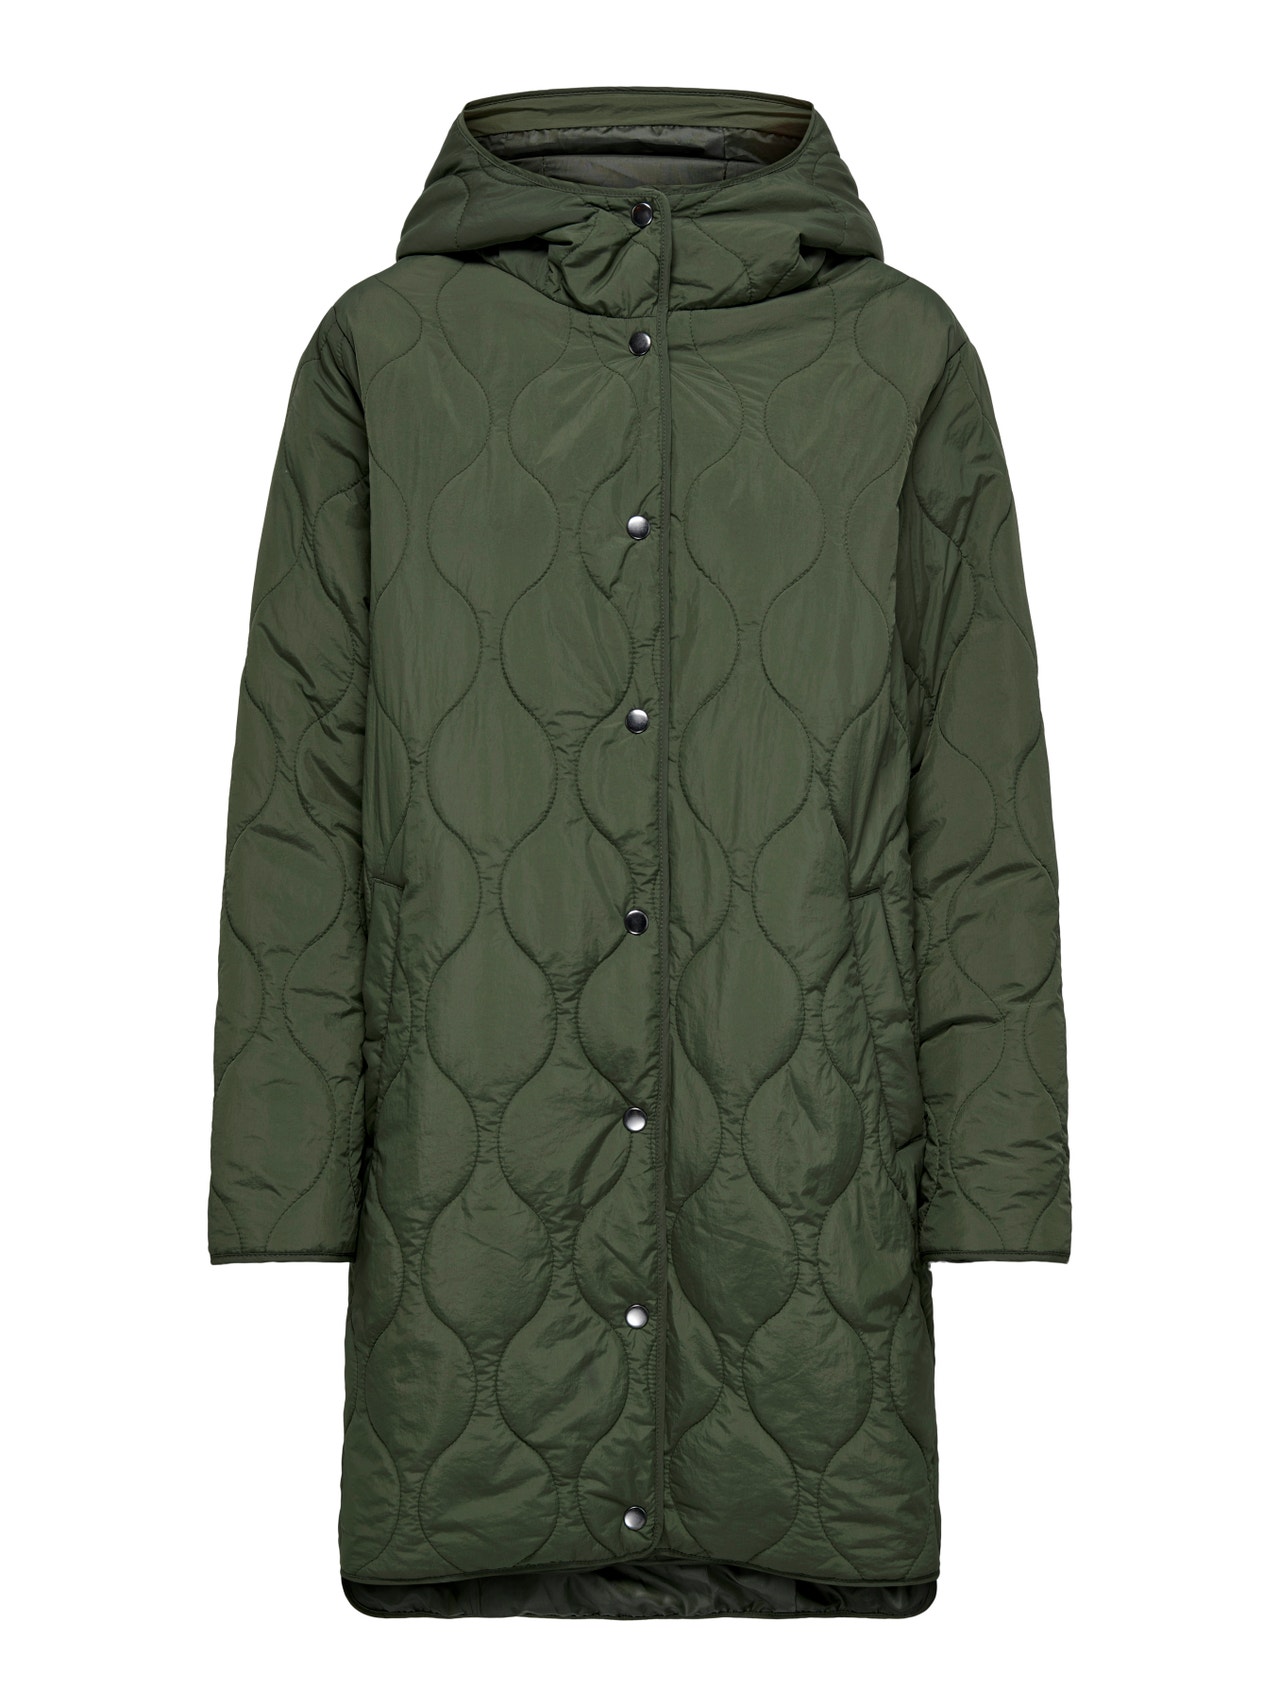 ONLY Long hooded coat -Forest Night - 15302203